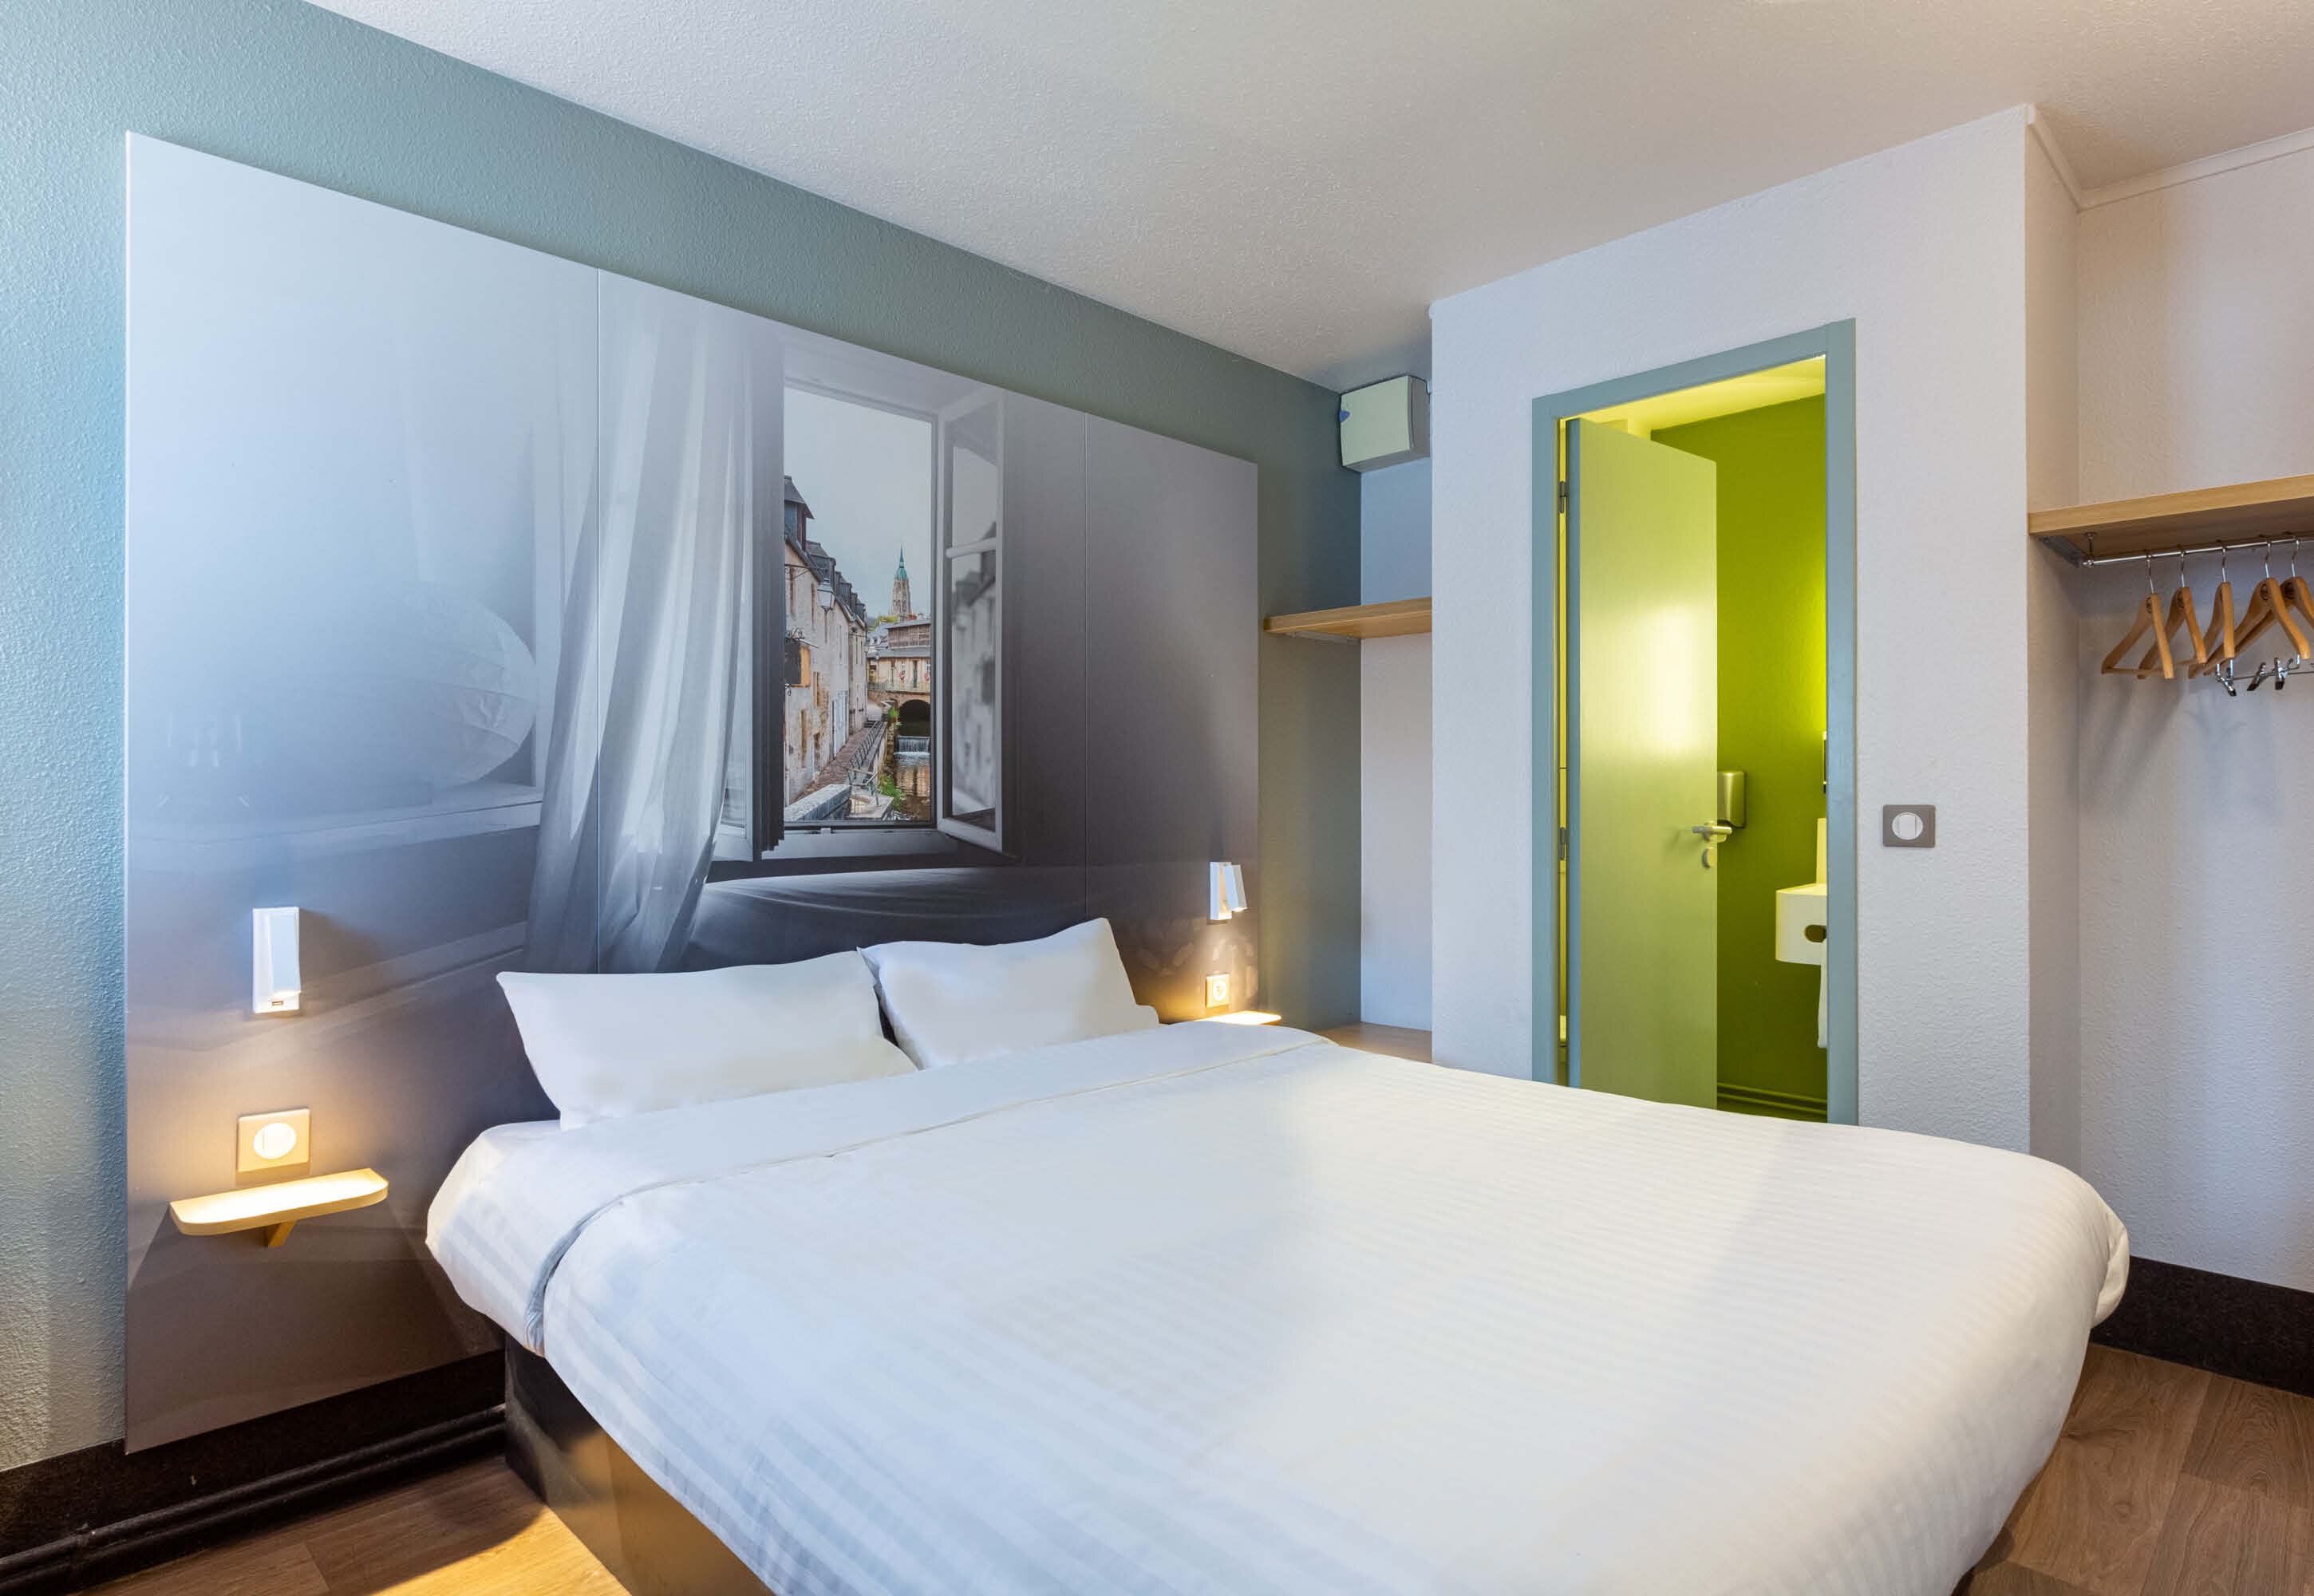 Images B&B HOTEL Chartres Le Forum